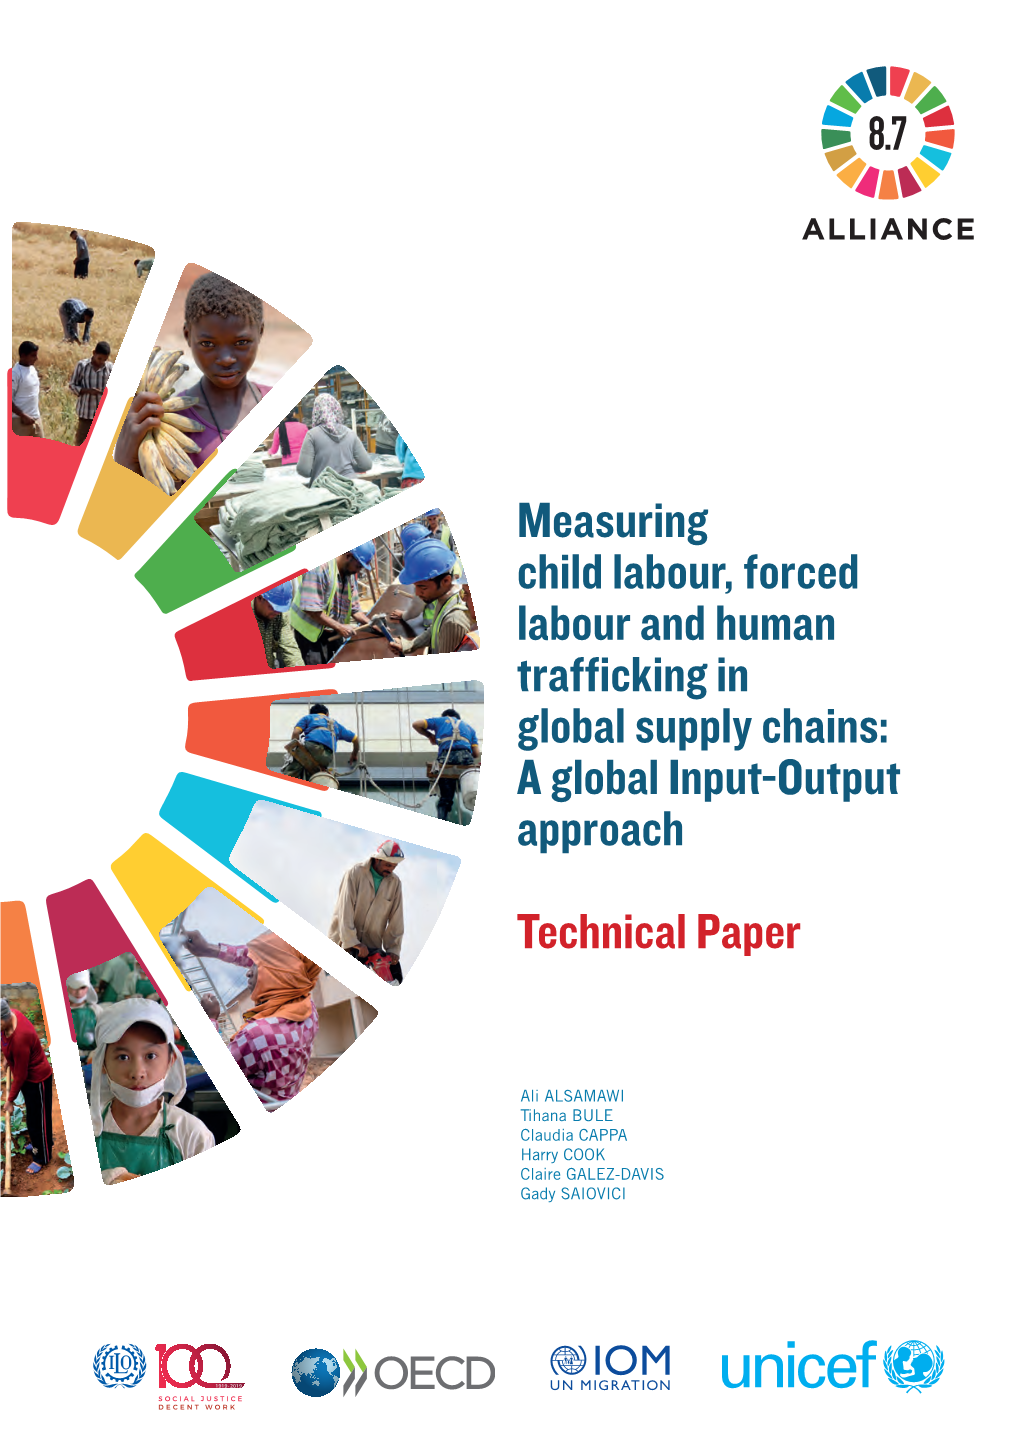 Measuring Child Labour, Forced Labour and Human Trafficking in Global Supply Chains: a Global Input-Output Approach Technical Paper